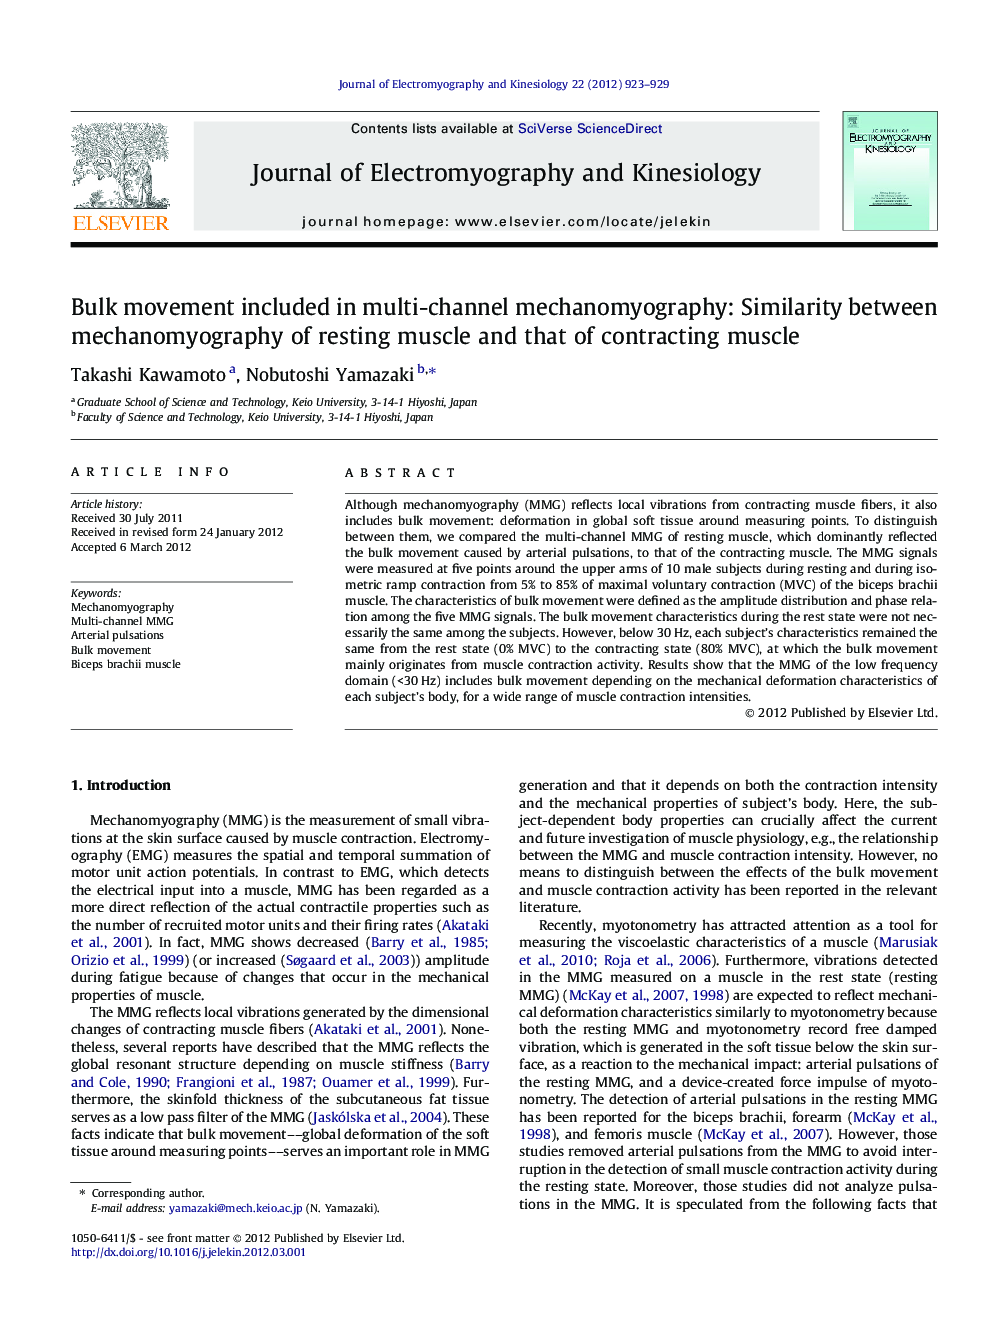 Bulk movement included in multi-channel mechanomyography: Similarity between mechanomyography of resting muscle and that of contracting muscle